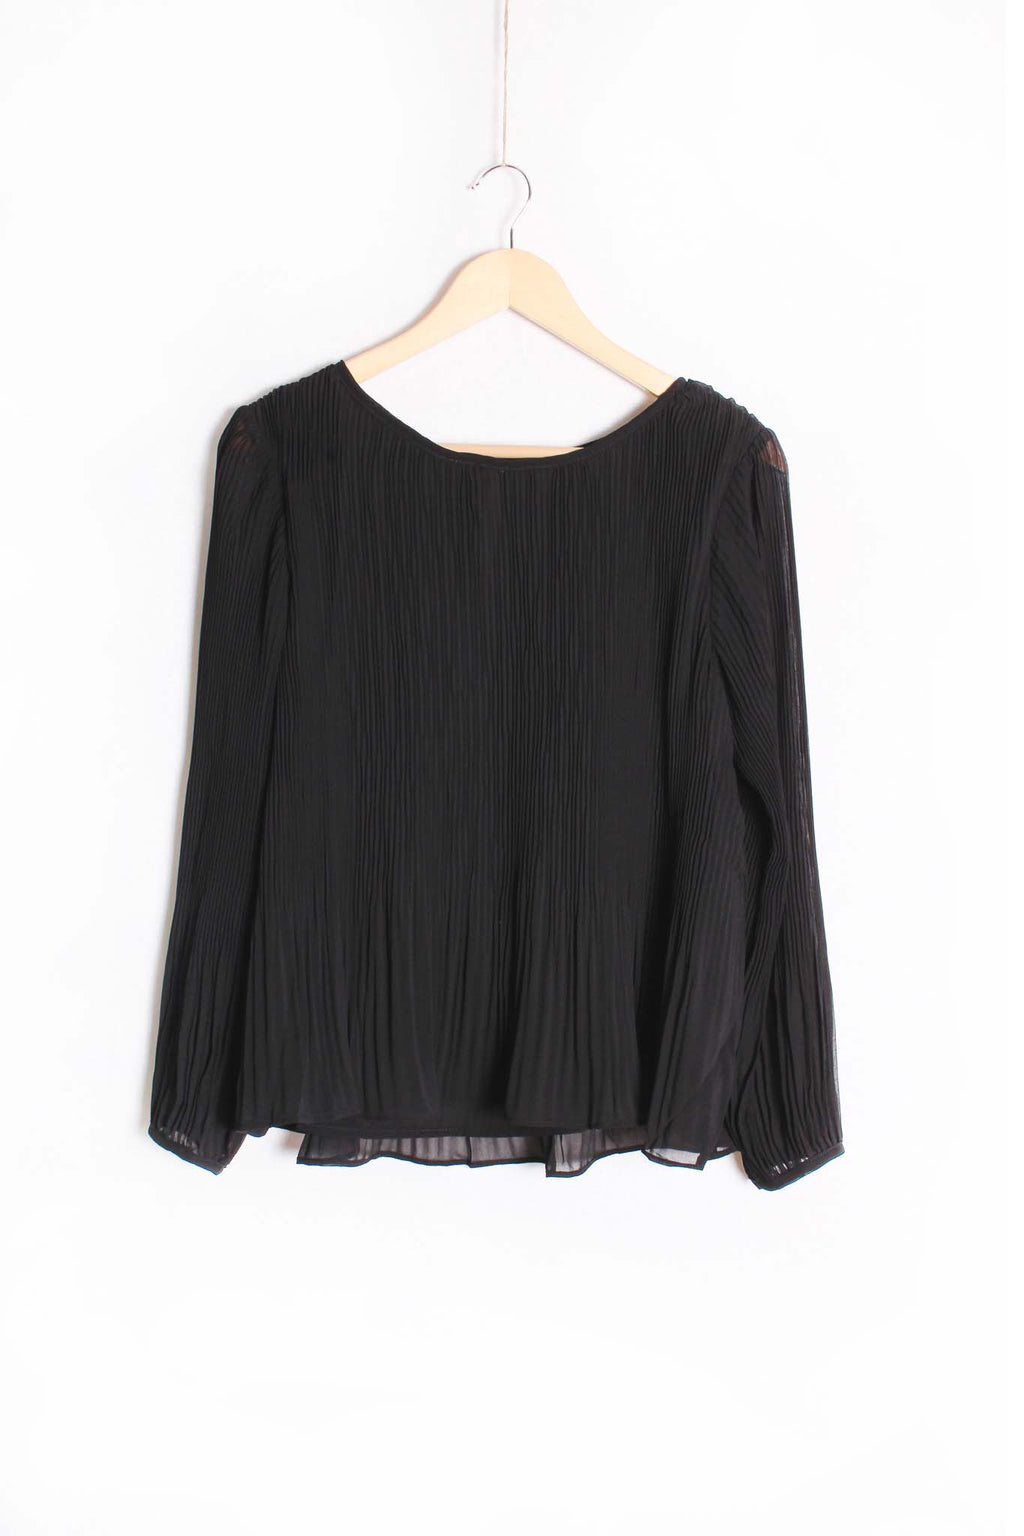 Women's Long Sleeves Boat Neck Solid Pleated Top